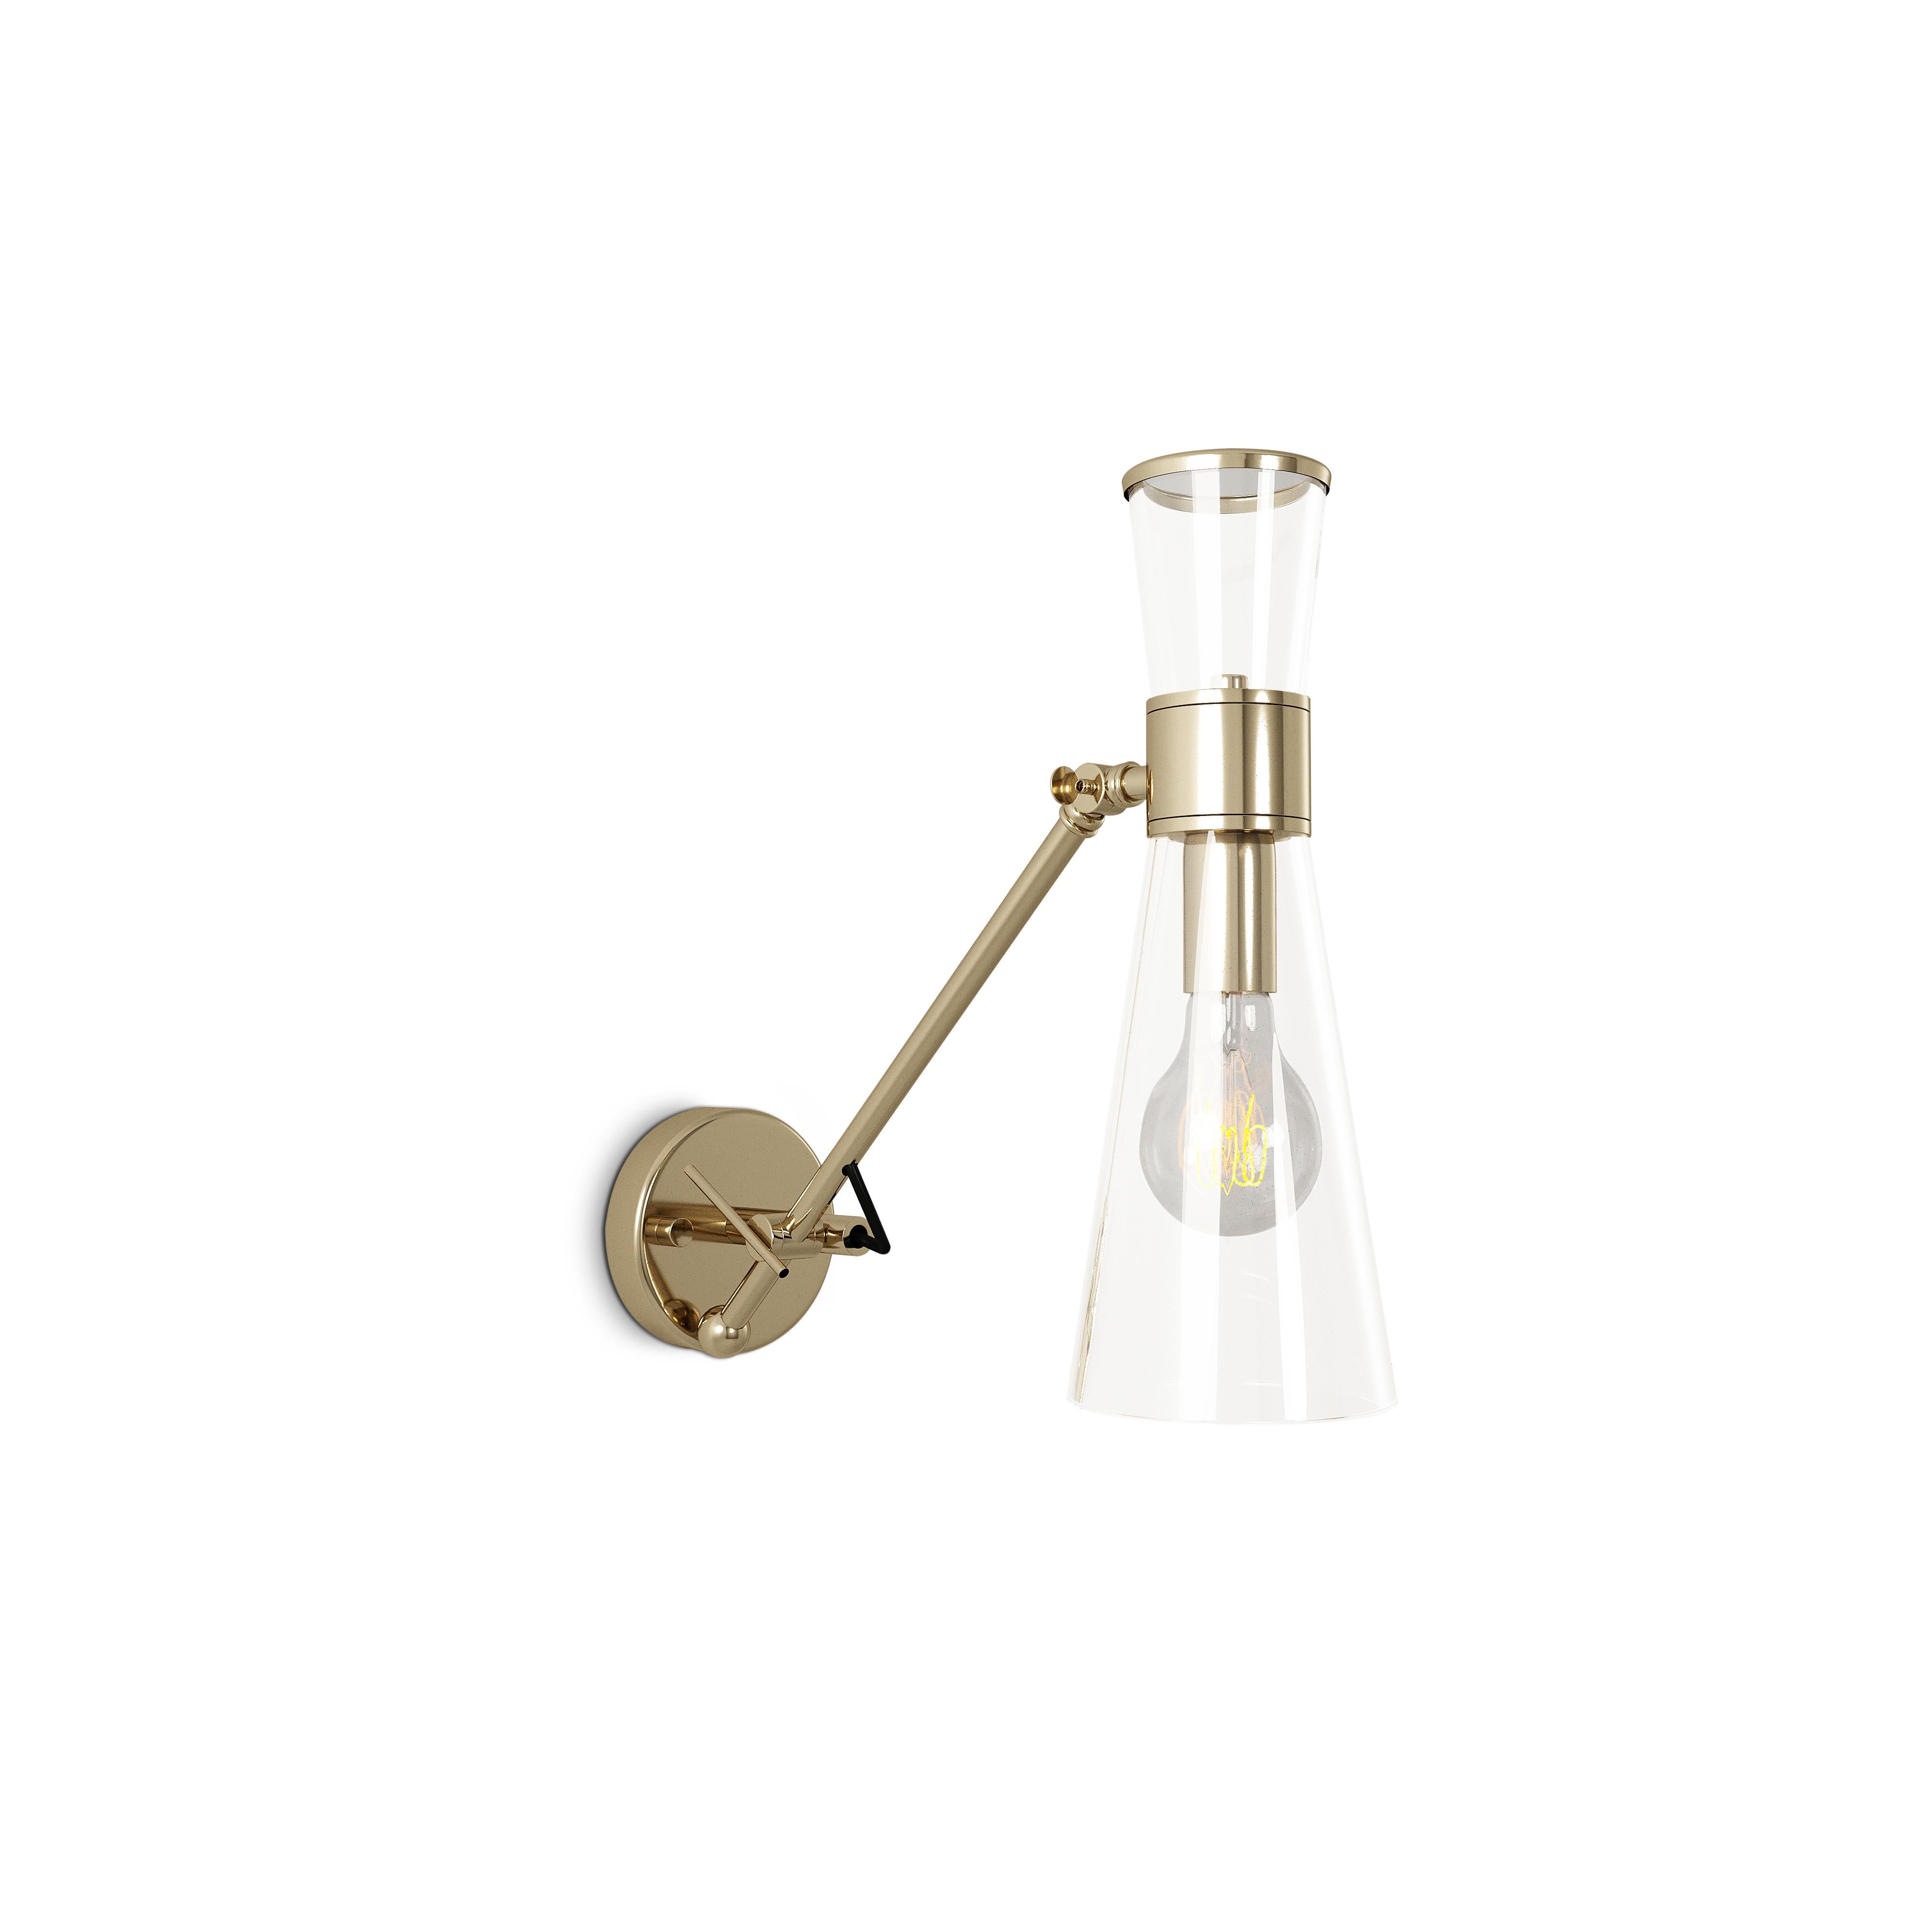 Portuguese 21st Century Mitte Wall Lamp Brass Glass For Sale